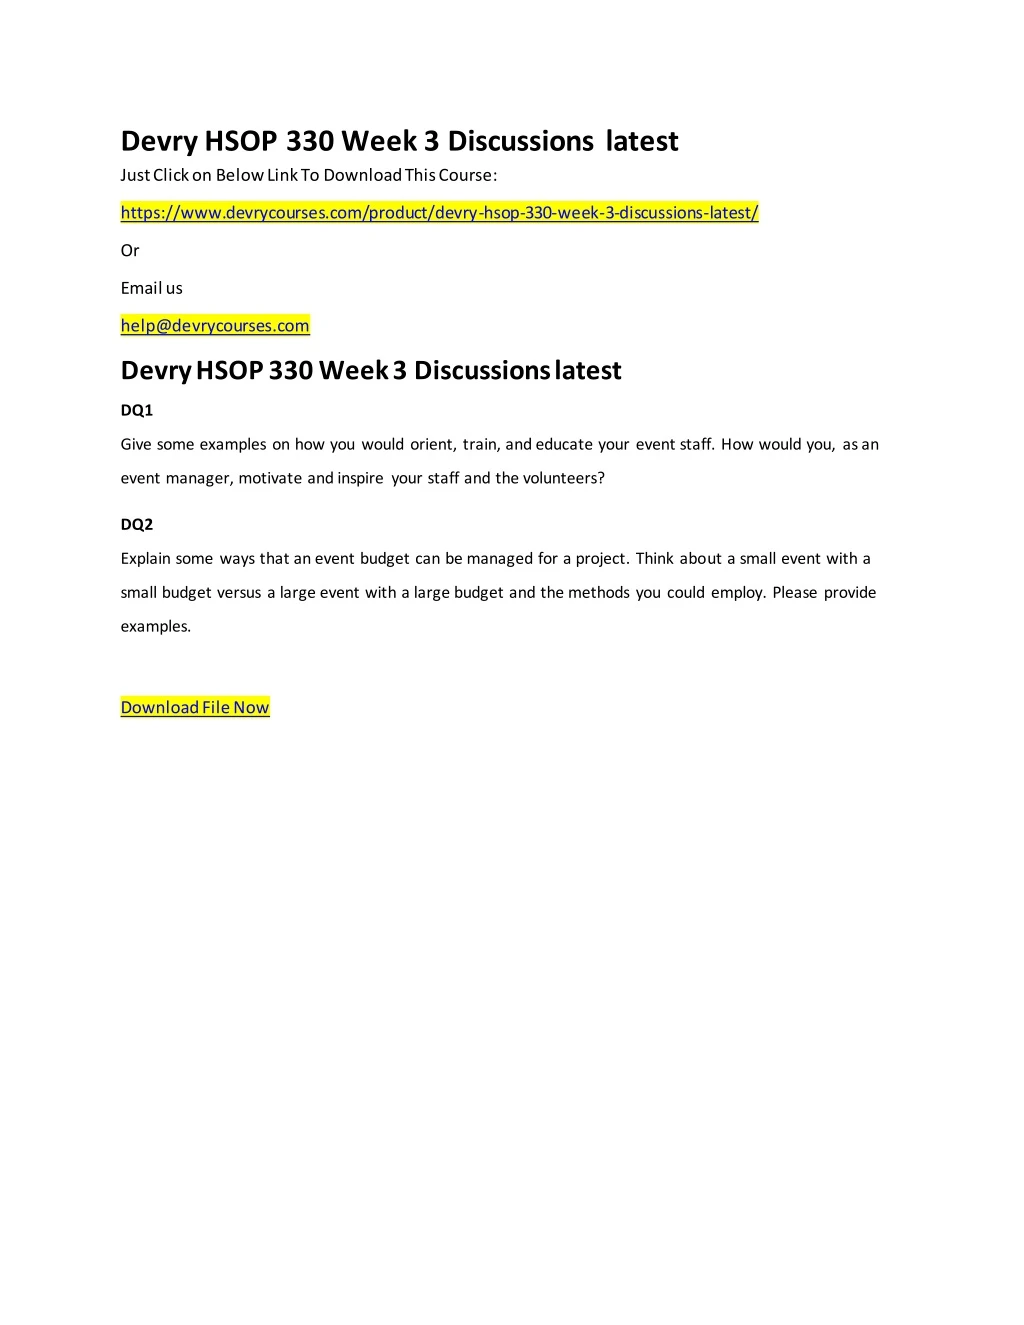 devry hsop 330 week 3 discussions latest just